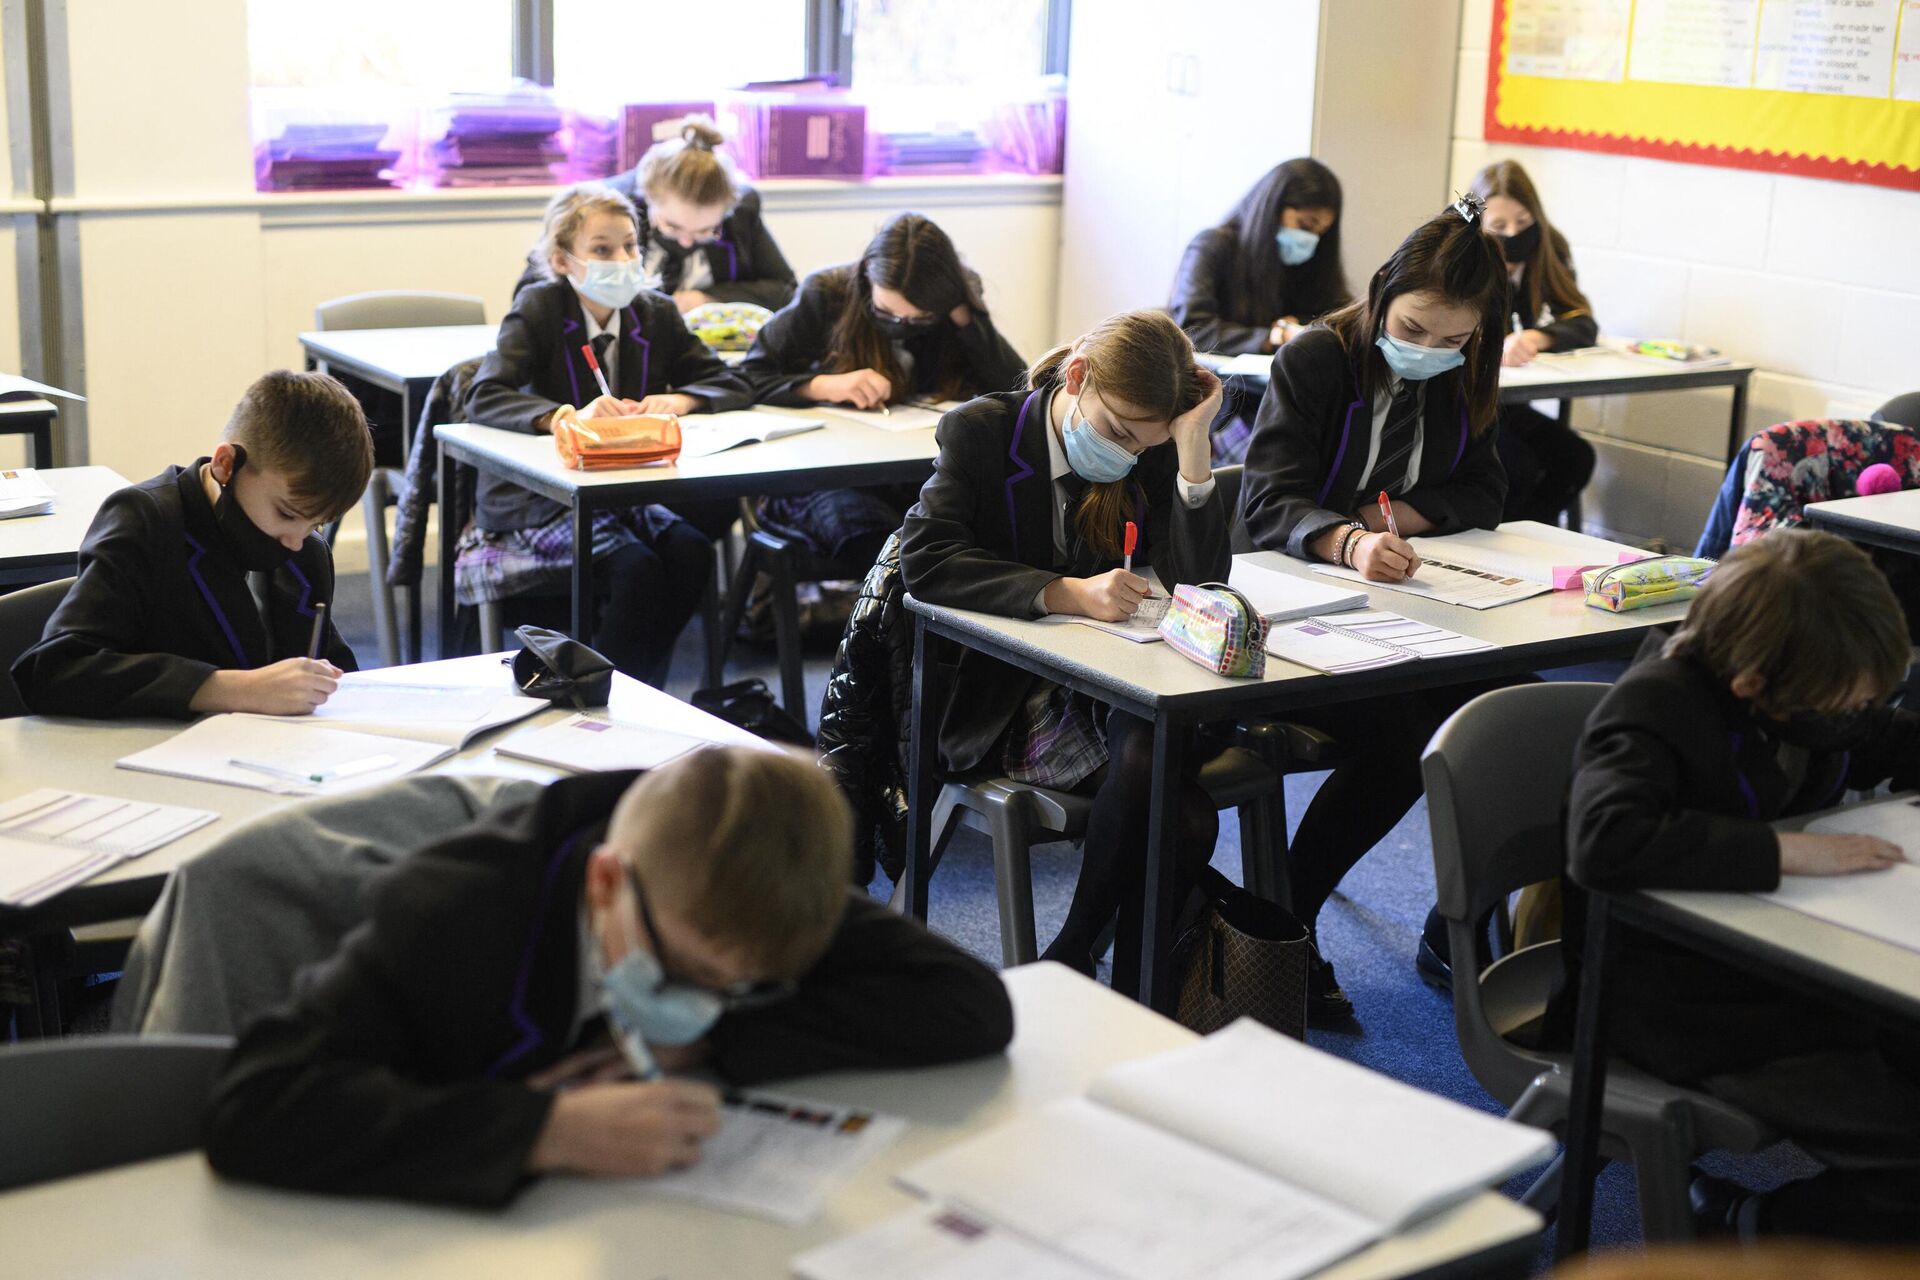 Year 8 students wear face masks or coverings to mitigate the spread of Covid-19, as they take part in an English class at Park Lane Academy in Halifax, northwest England on January 4, 2022. (Photo by OLI SCARFF / AFP) - Sputnik International, 1920, 23.10.2022